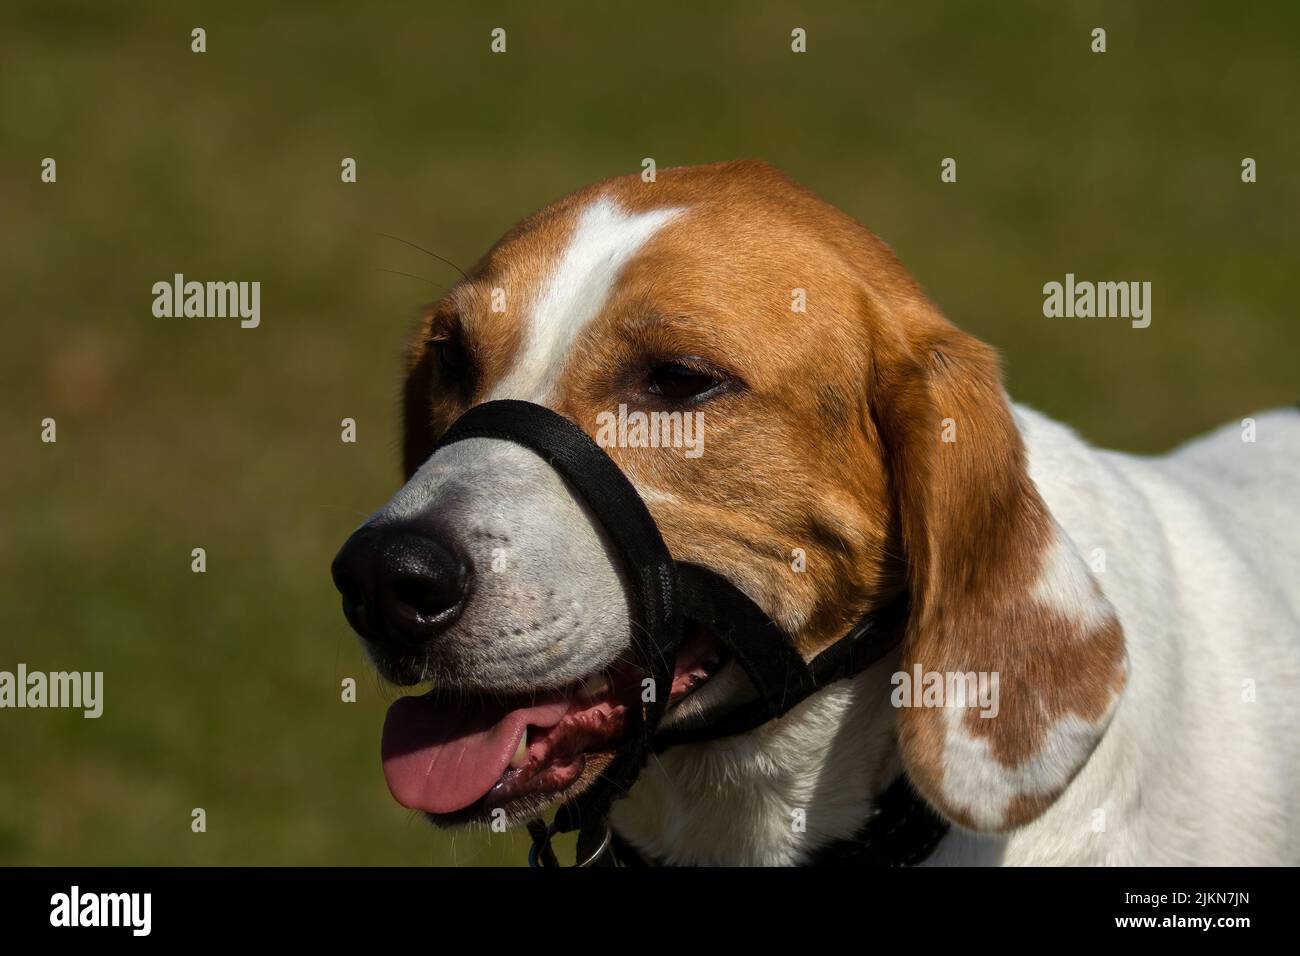 A muzzle collar on brown and white dog Stock Photo